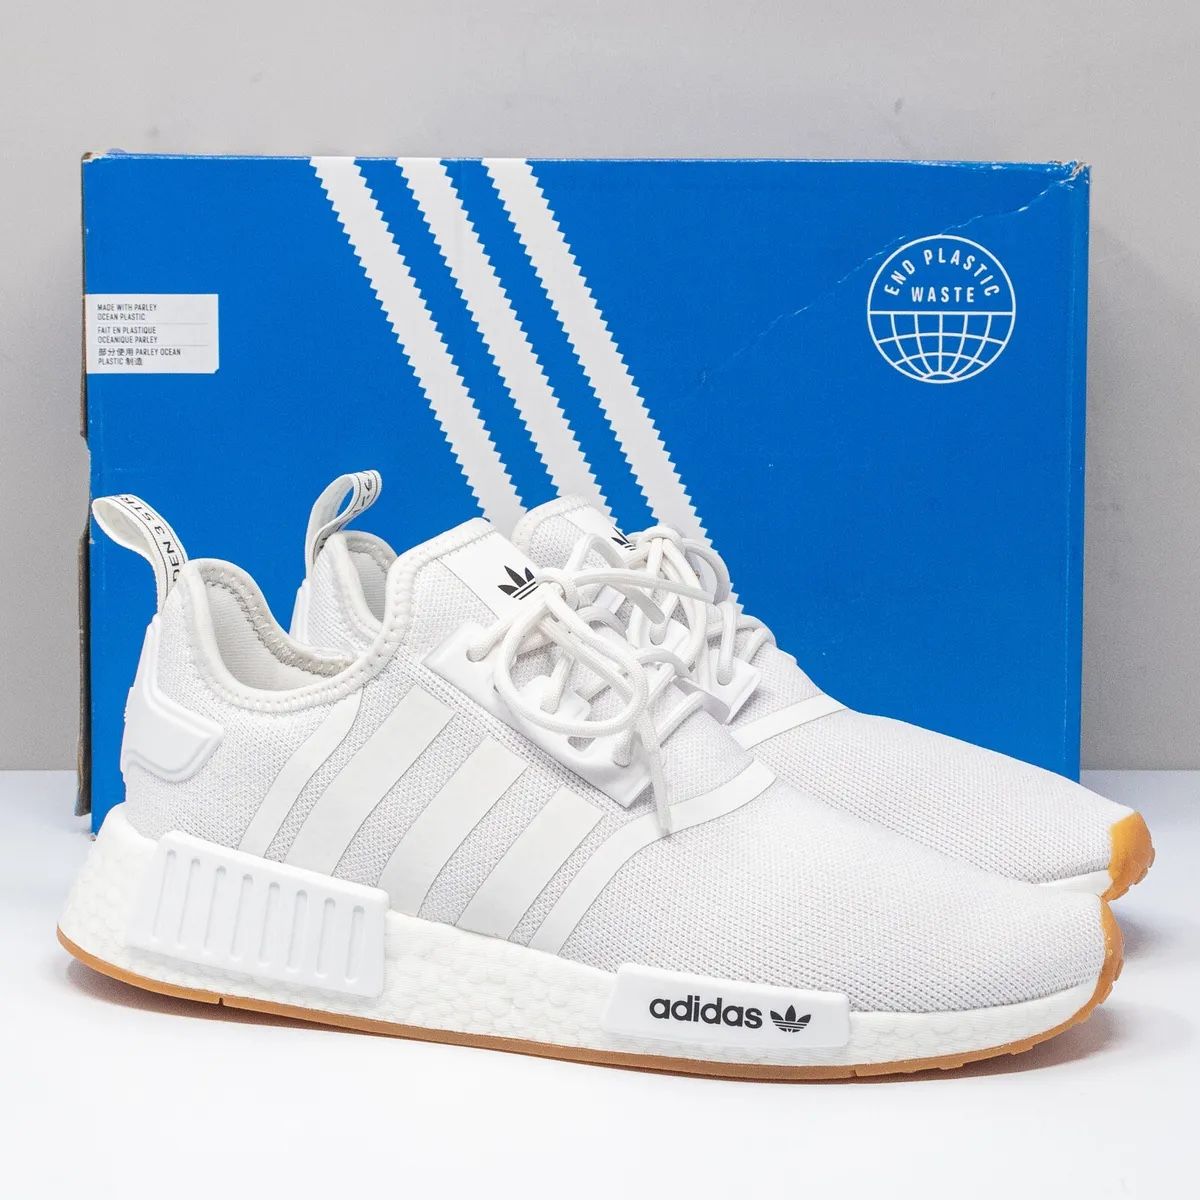 Adidas NMD R1 PrimeBlue White Sneakers Size 9 new in box